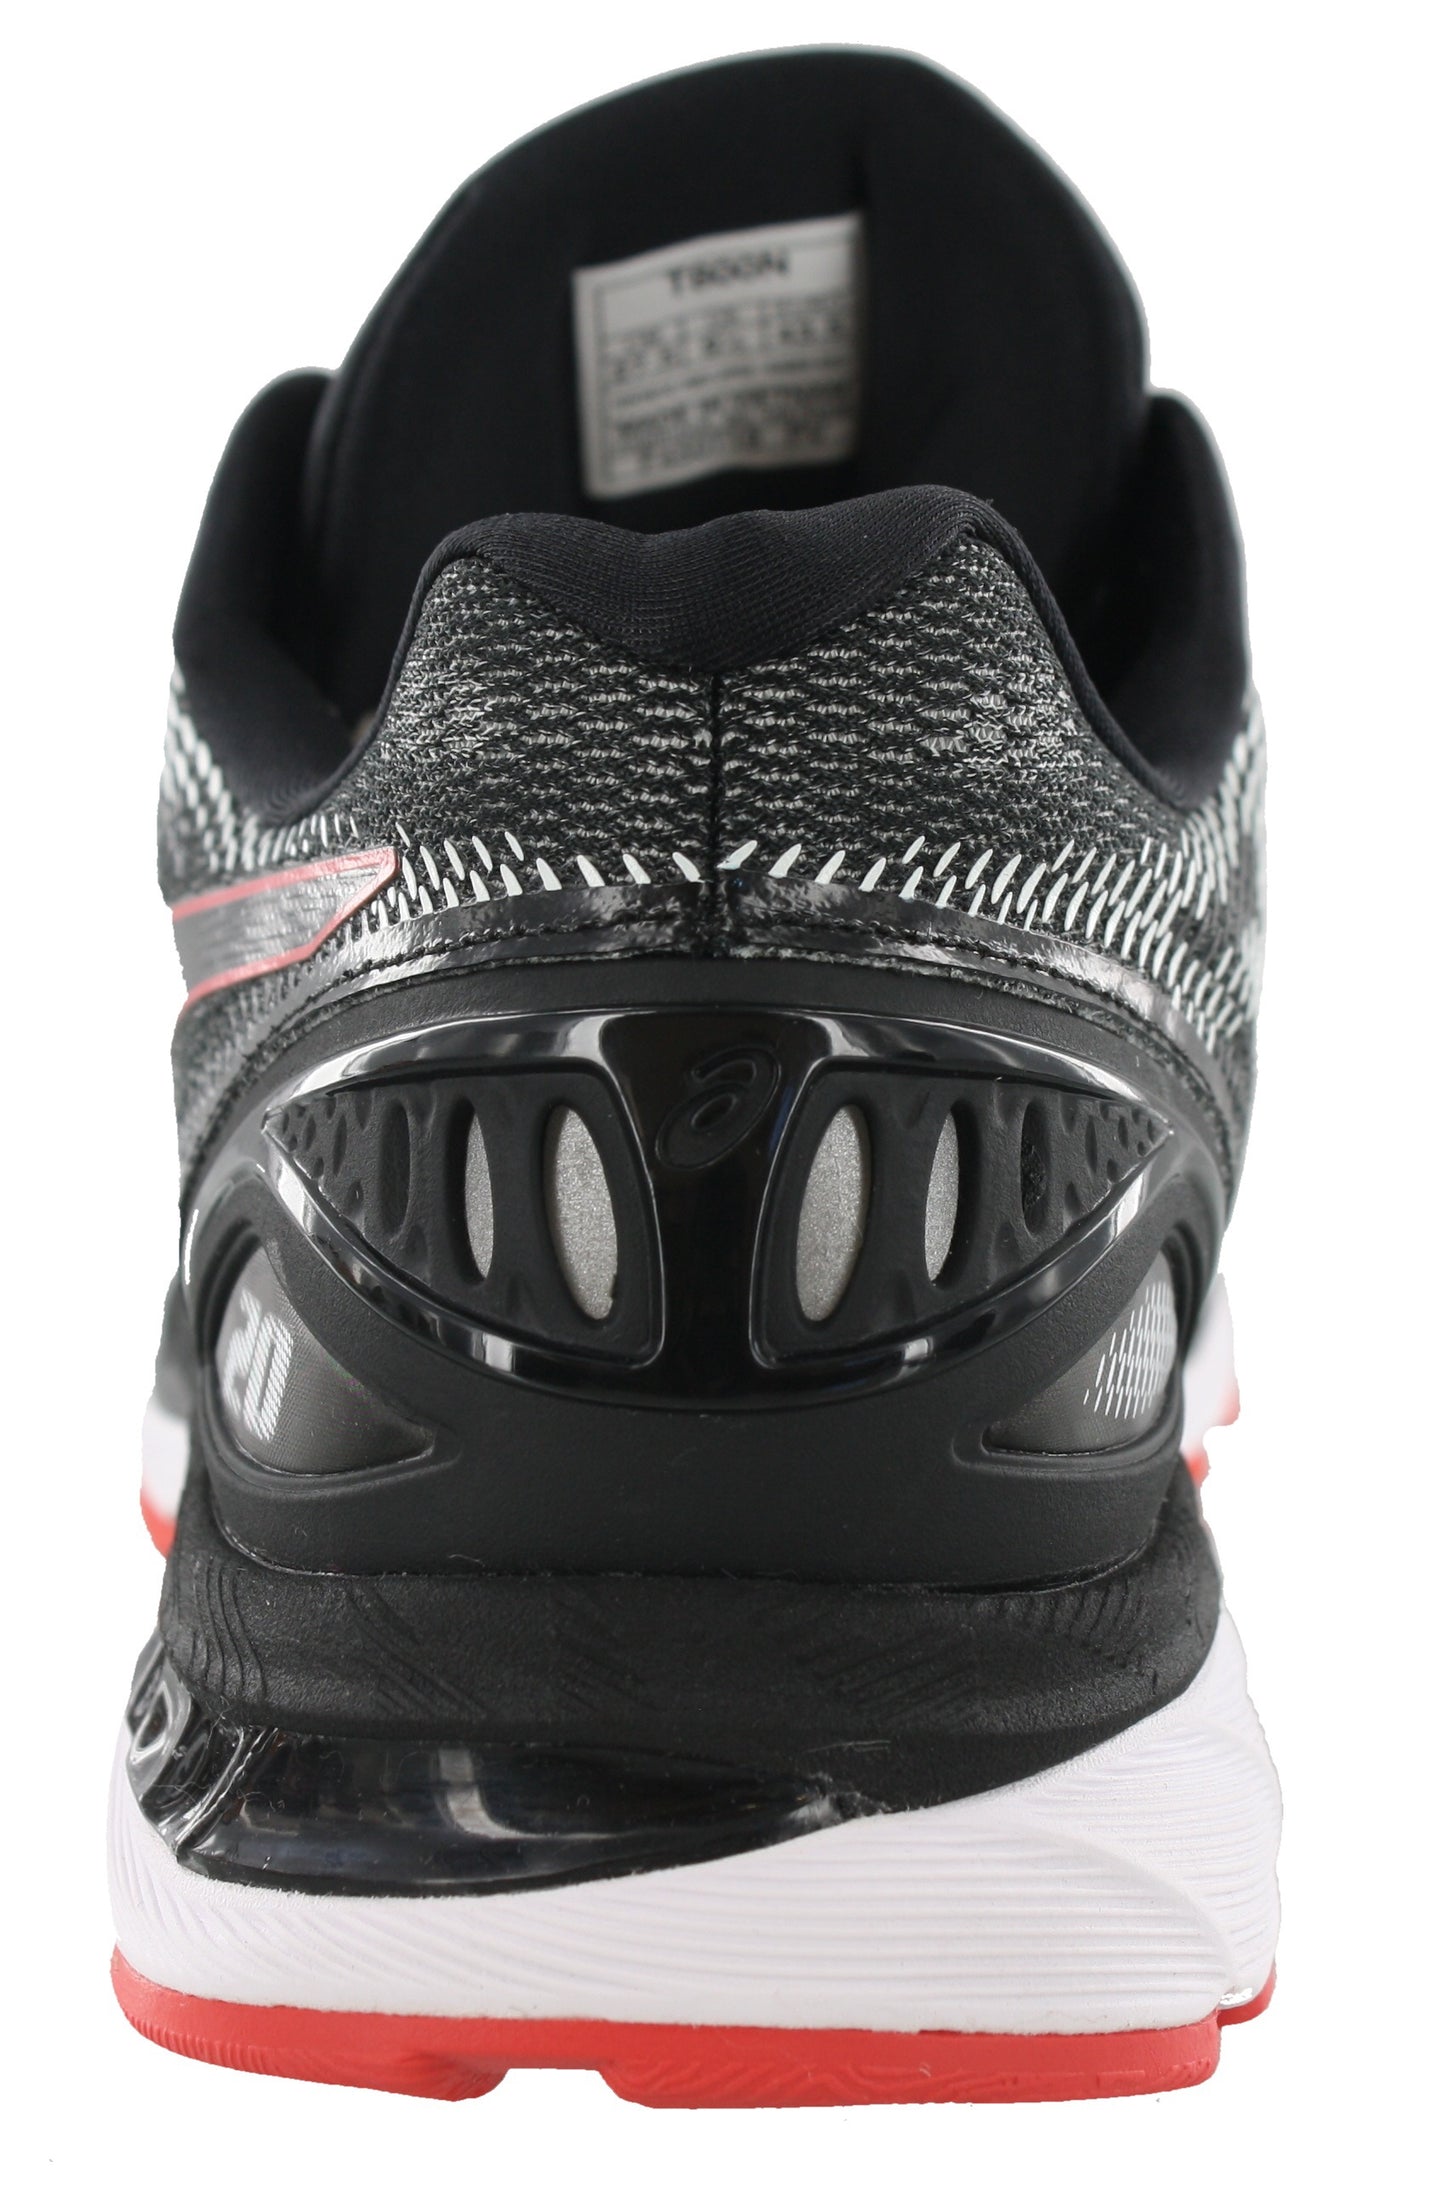 
                  
                    Back of Black with Red Alert, Grey, and White accents ASICS Men Walking Trail Cushioned Running Shoes Gel Nimbus 20
                  
                